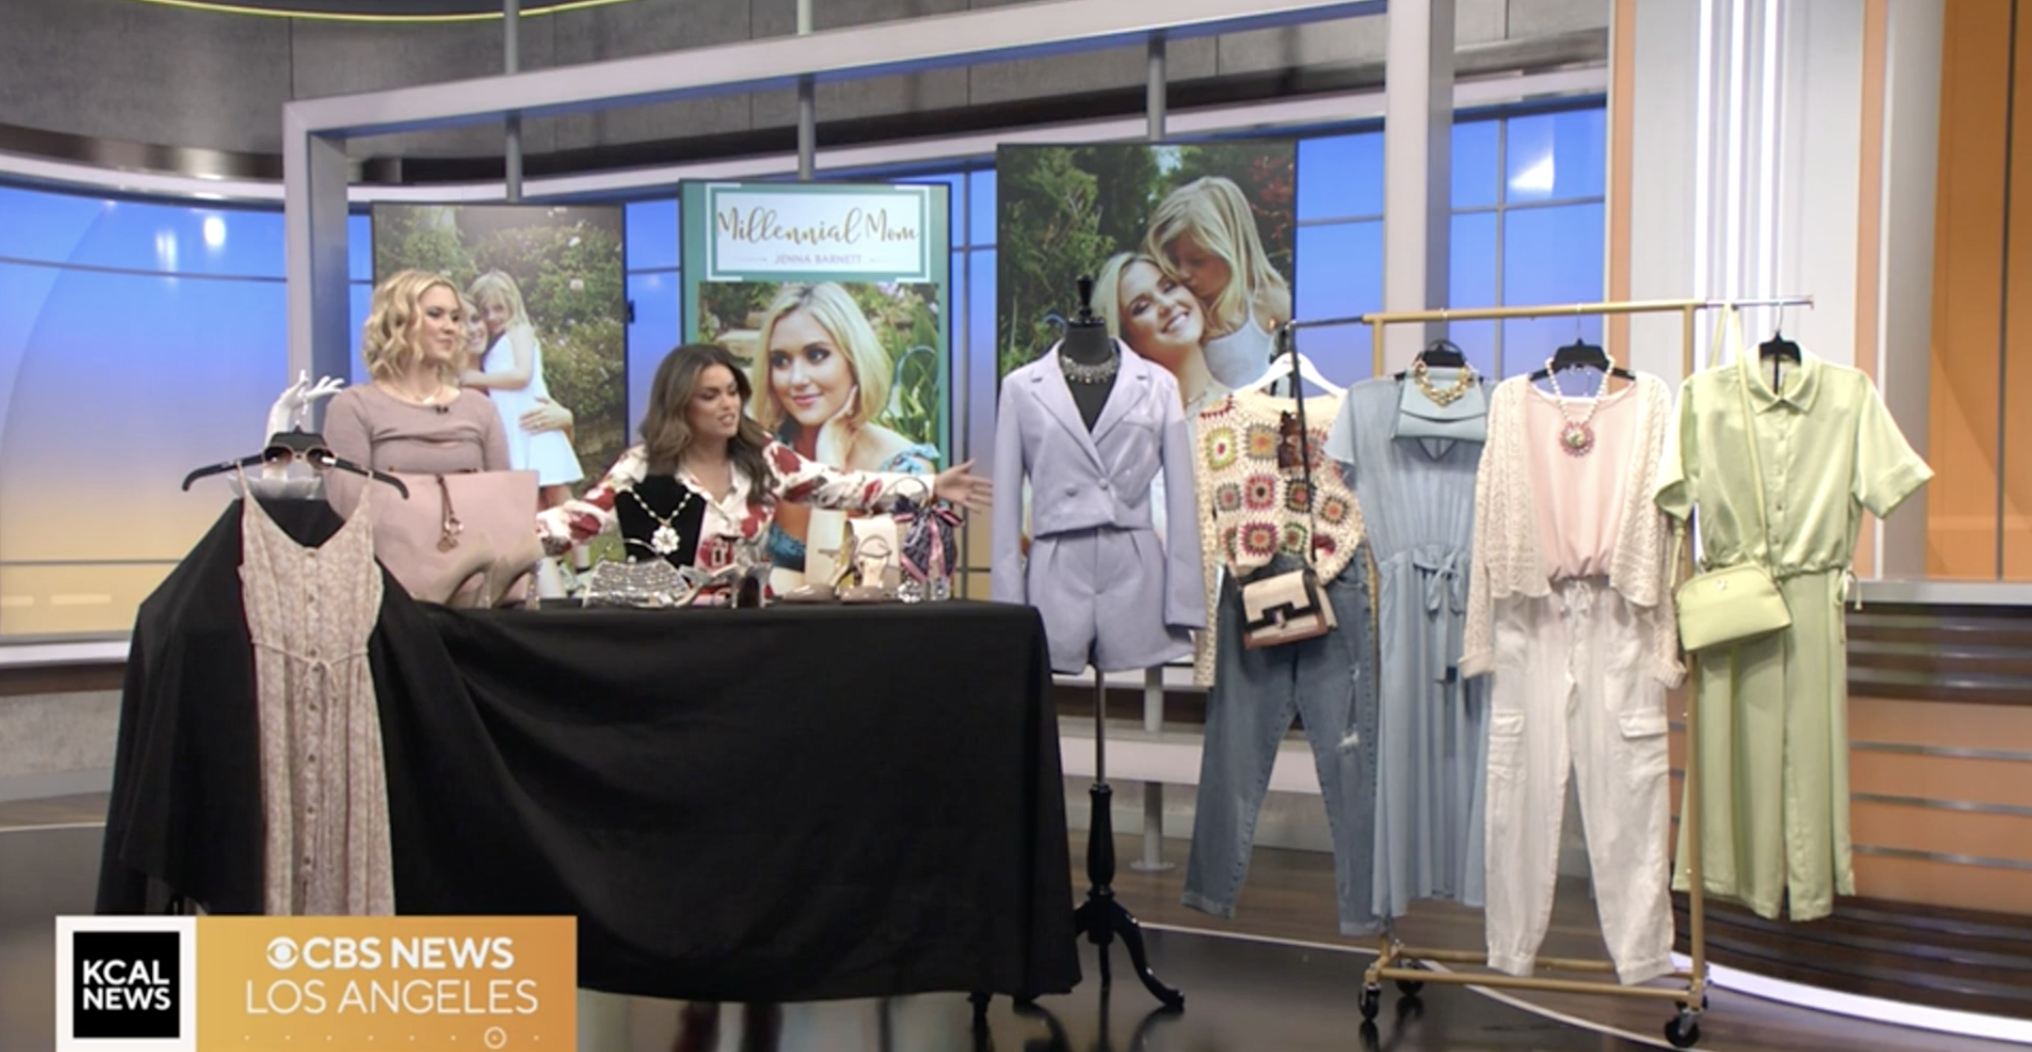 KCAL: Spring Fashion Trends with T.J. Maxx & Marshalls Millennial Mom